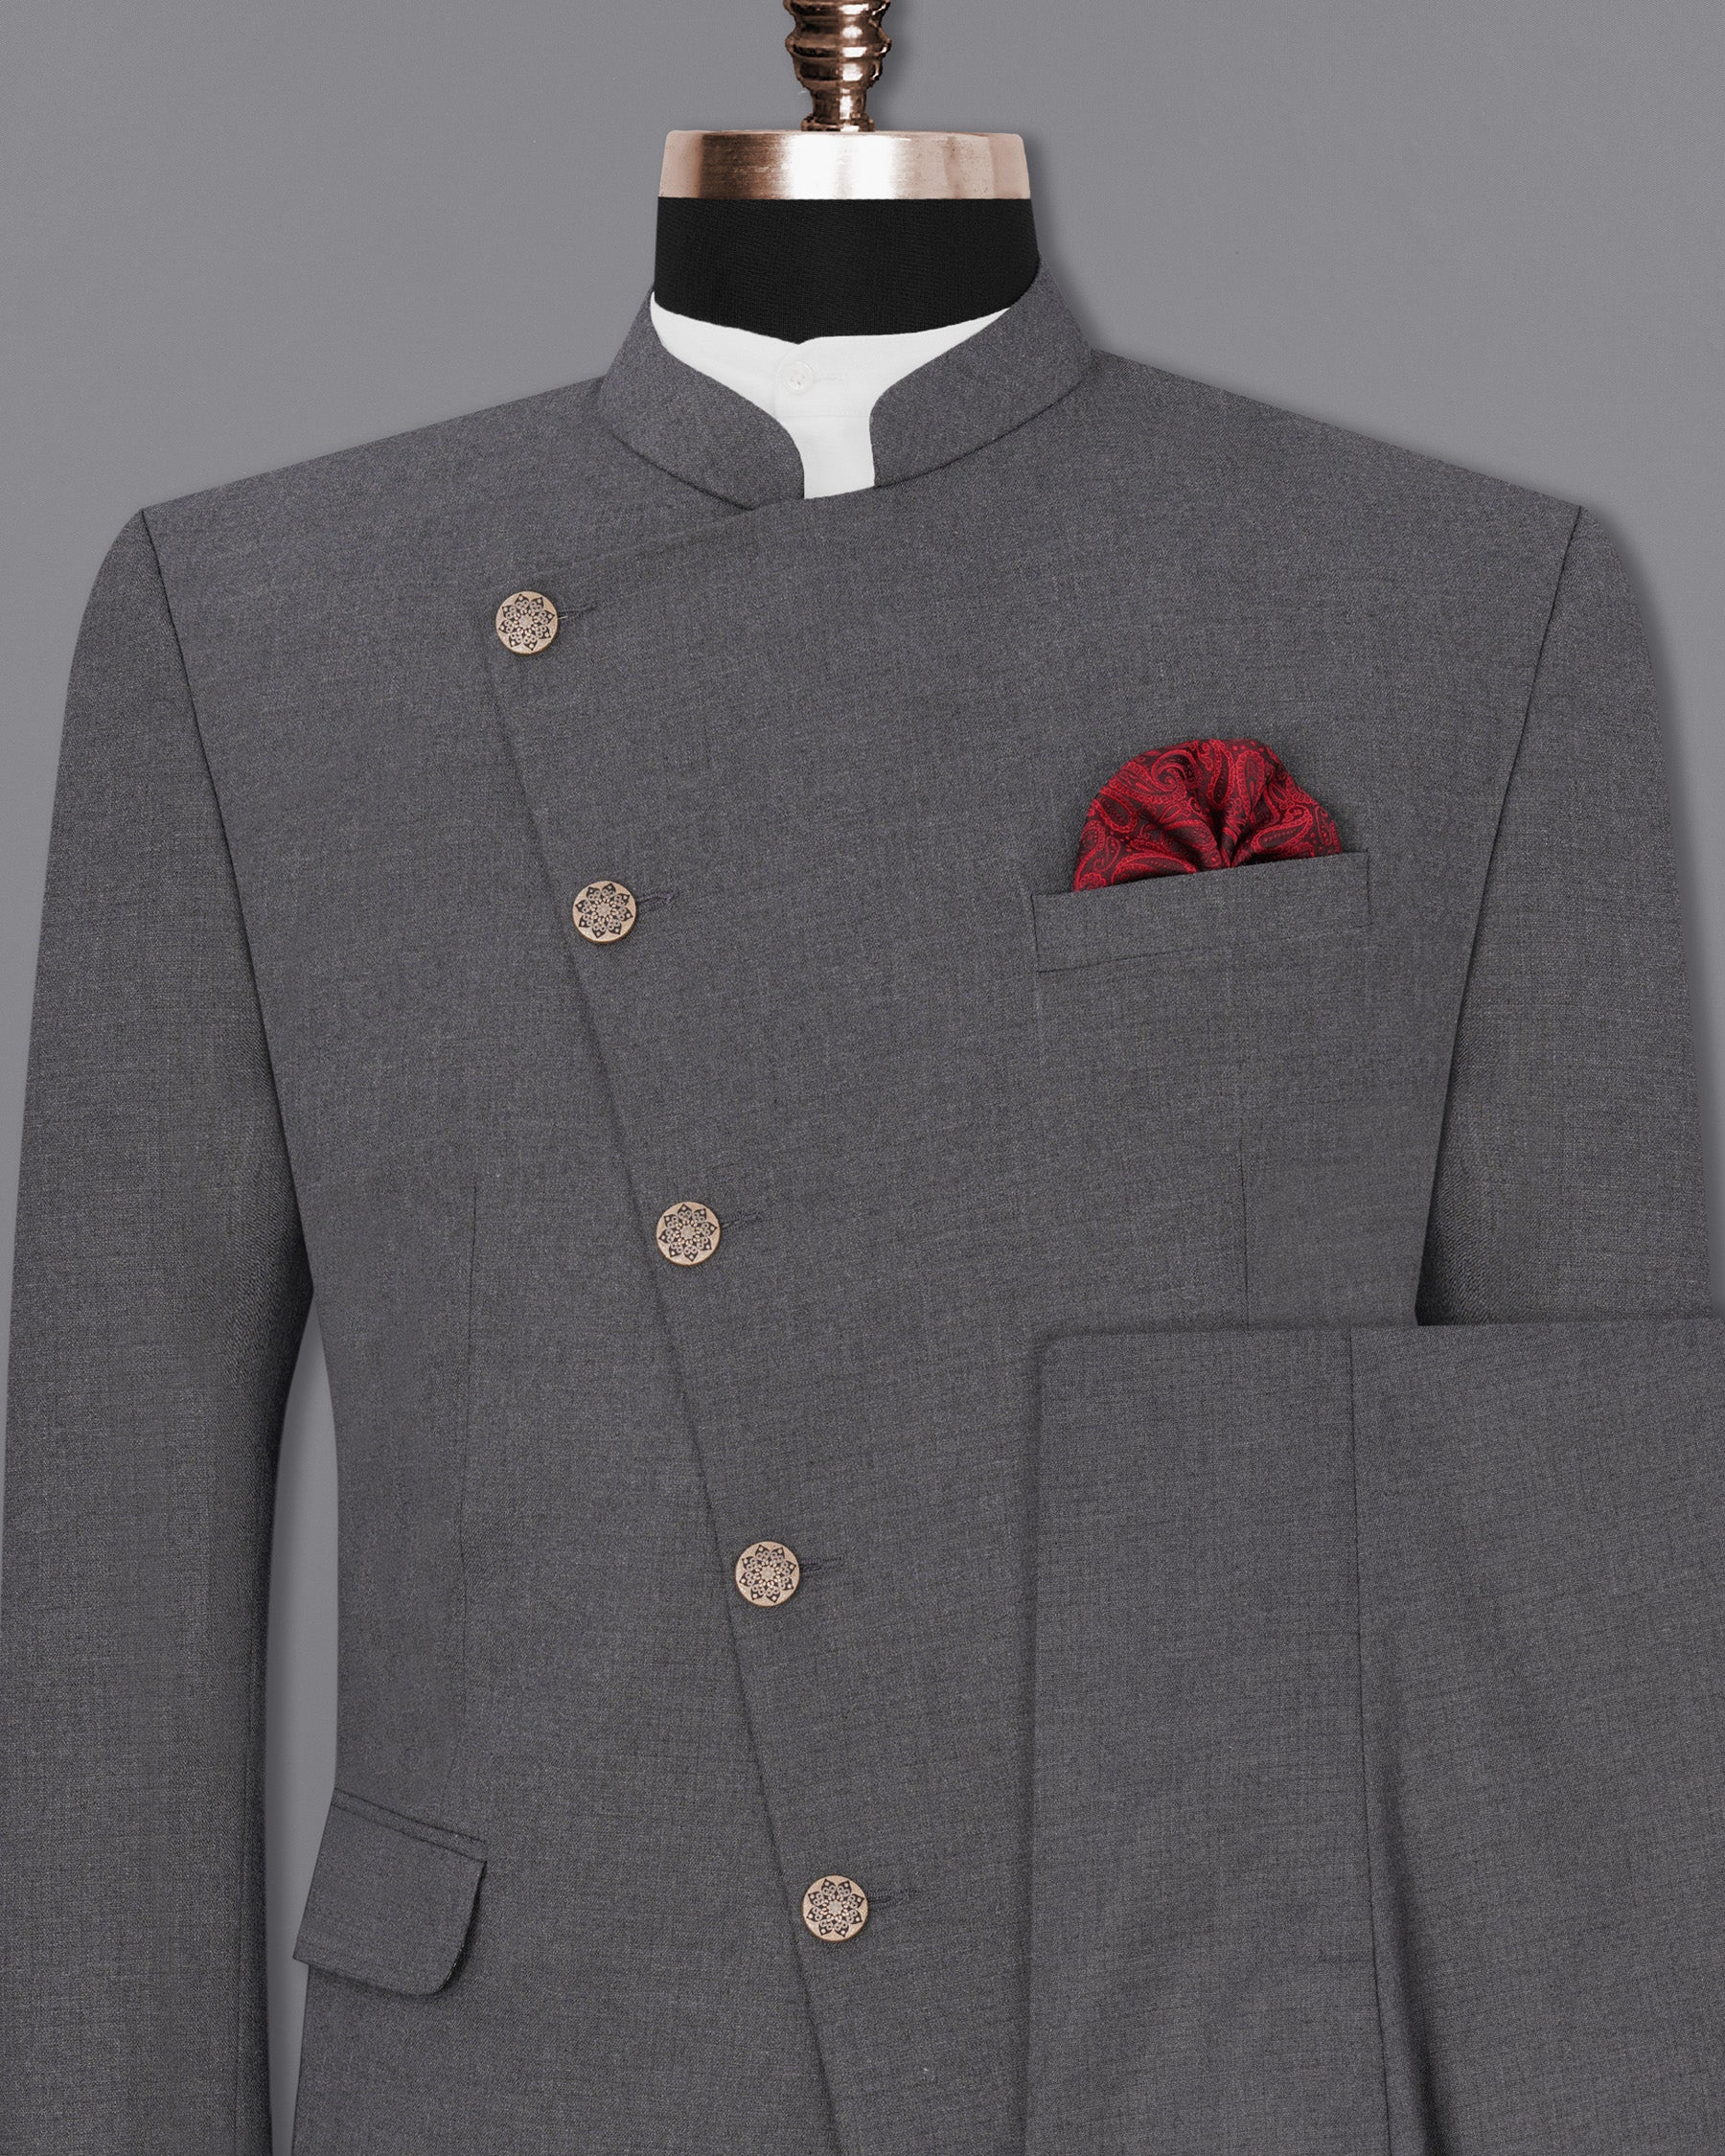 Vampire Gray Cross Buttoned Bandhgala Suit ST1903-CBG-36, ST1903-CBG-38, ST1903-CBG-40, ST1903-CBG-42, ST1903-CBG-44, ST1903-CBG-46, ST1903-CBG-48, ST1903-CBG-50, ST1903-CBG-52, ST1903-CBG-54, ST1903-CBG-56, ST1903-CBG-58, ST1903-CBG-60